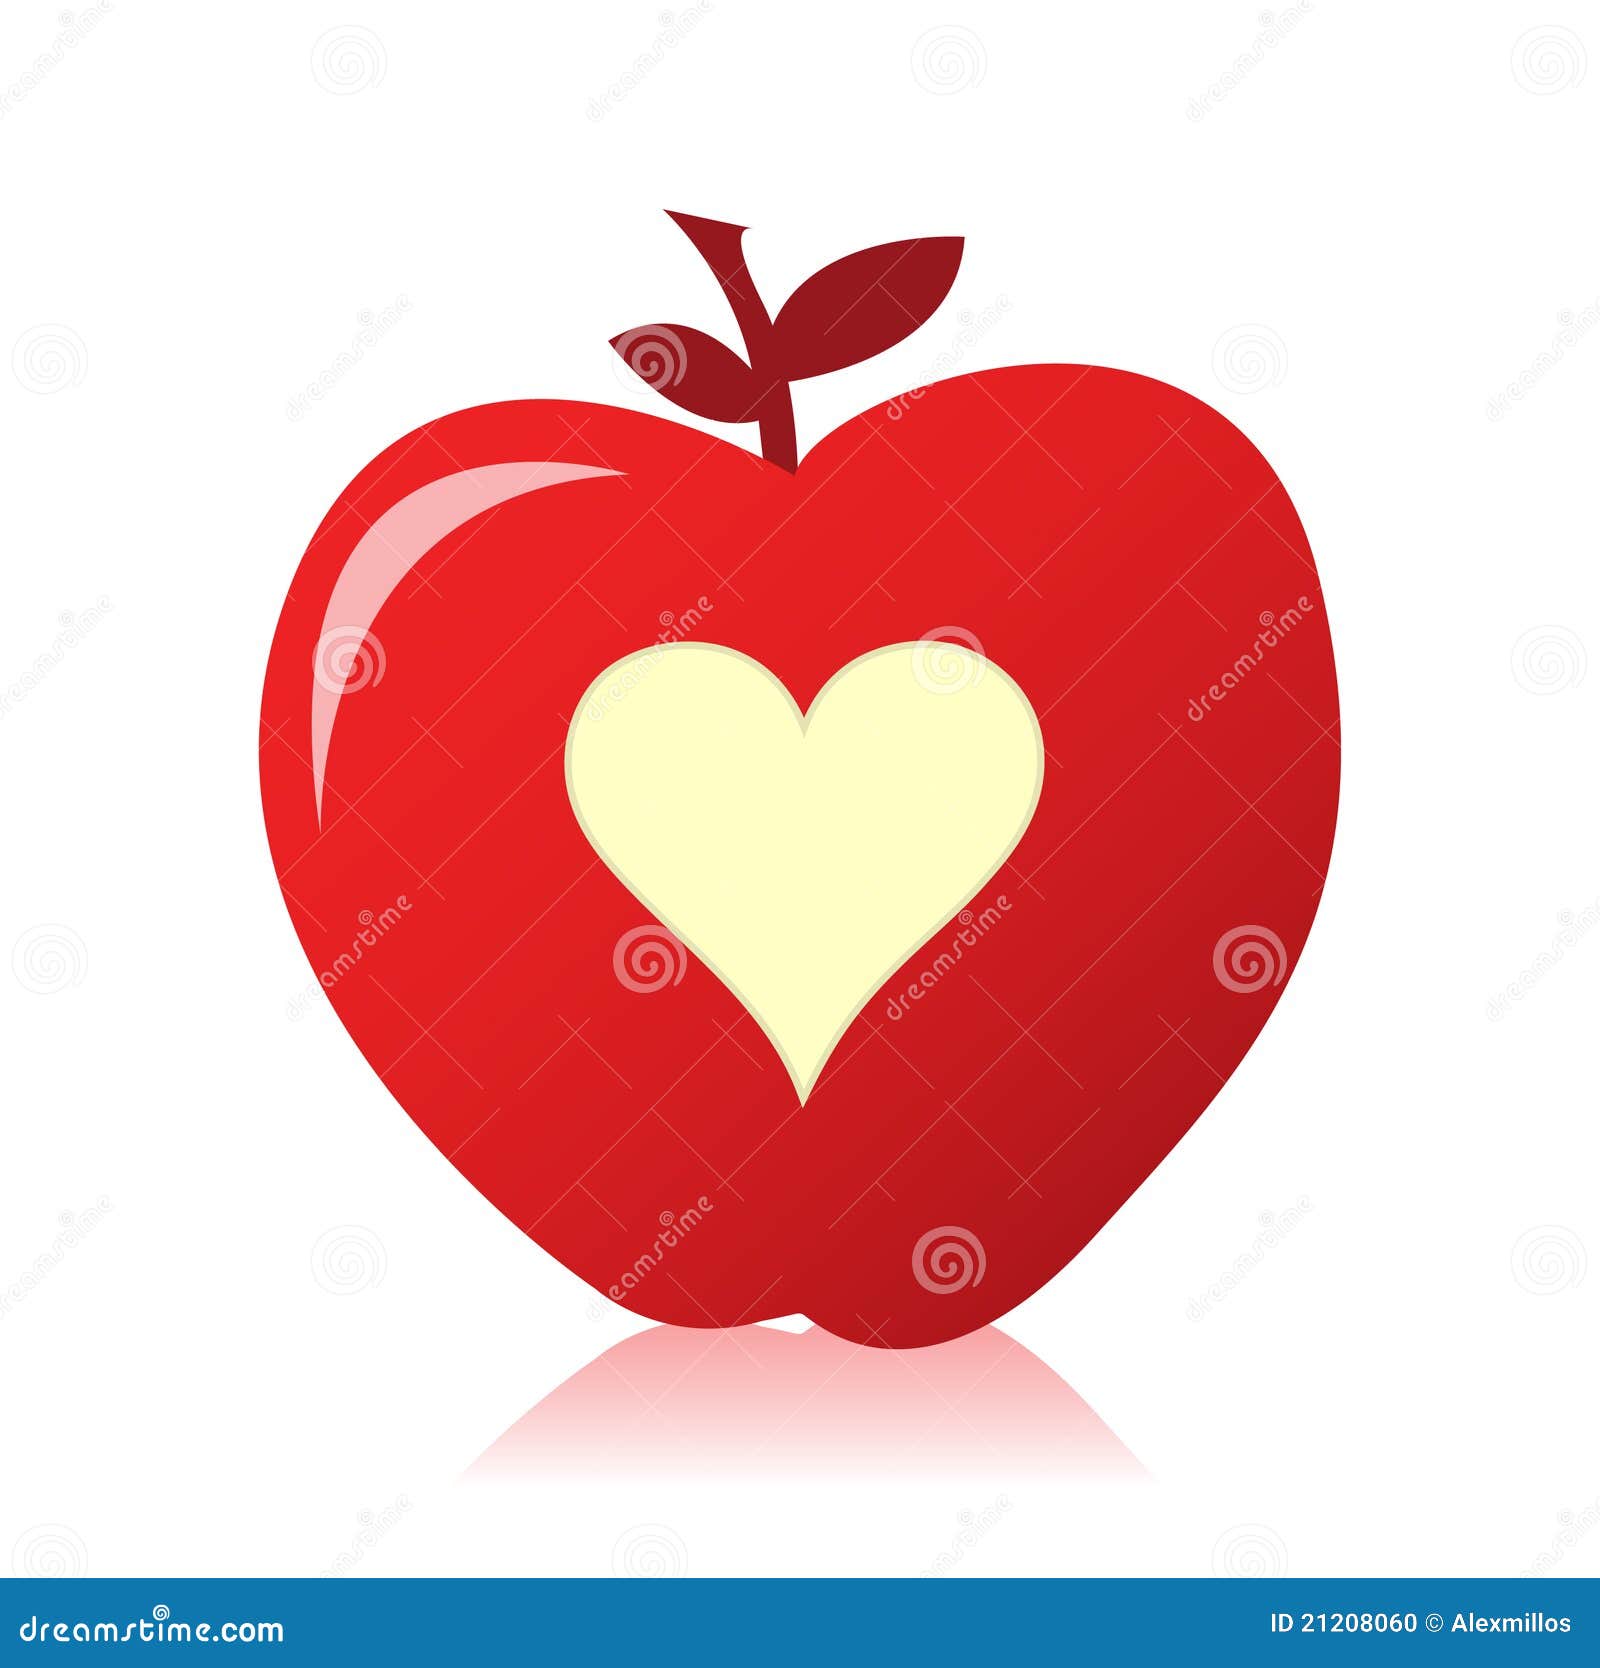 clipart apple with heart - photo #18